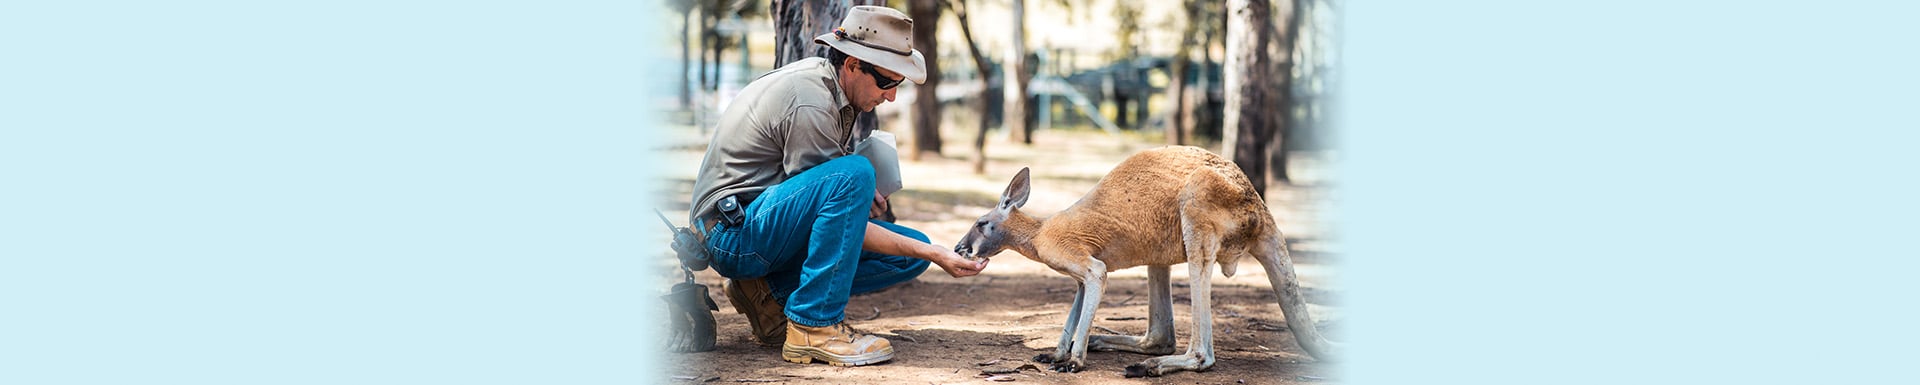 Best Jobs Working With Animals: Follow Your Passion - UoPeople